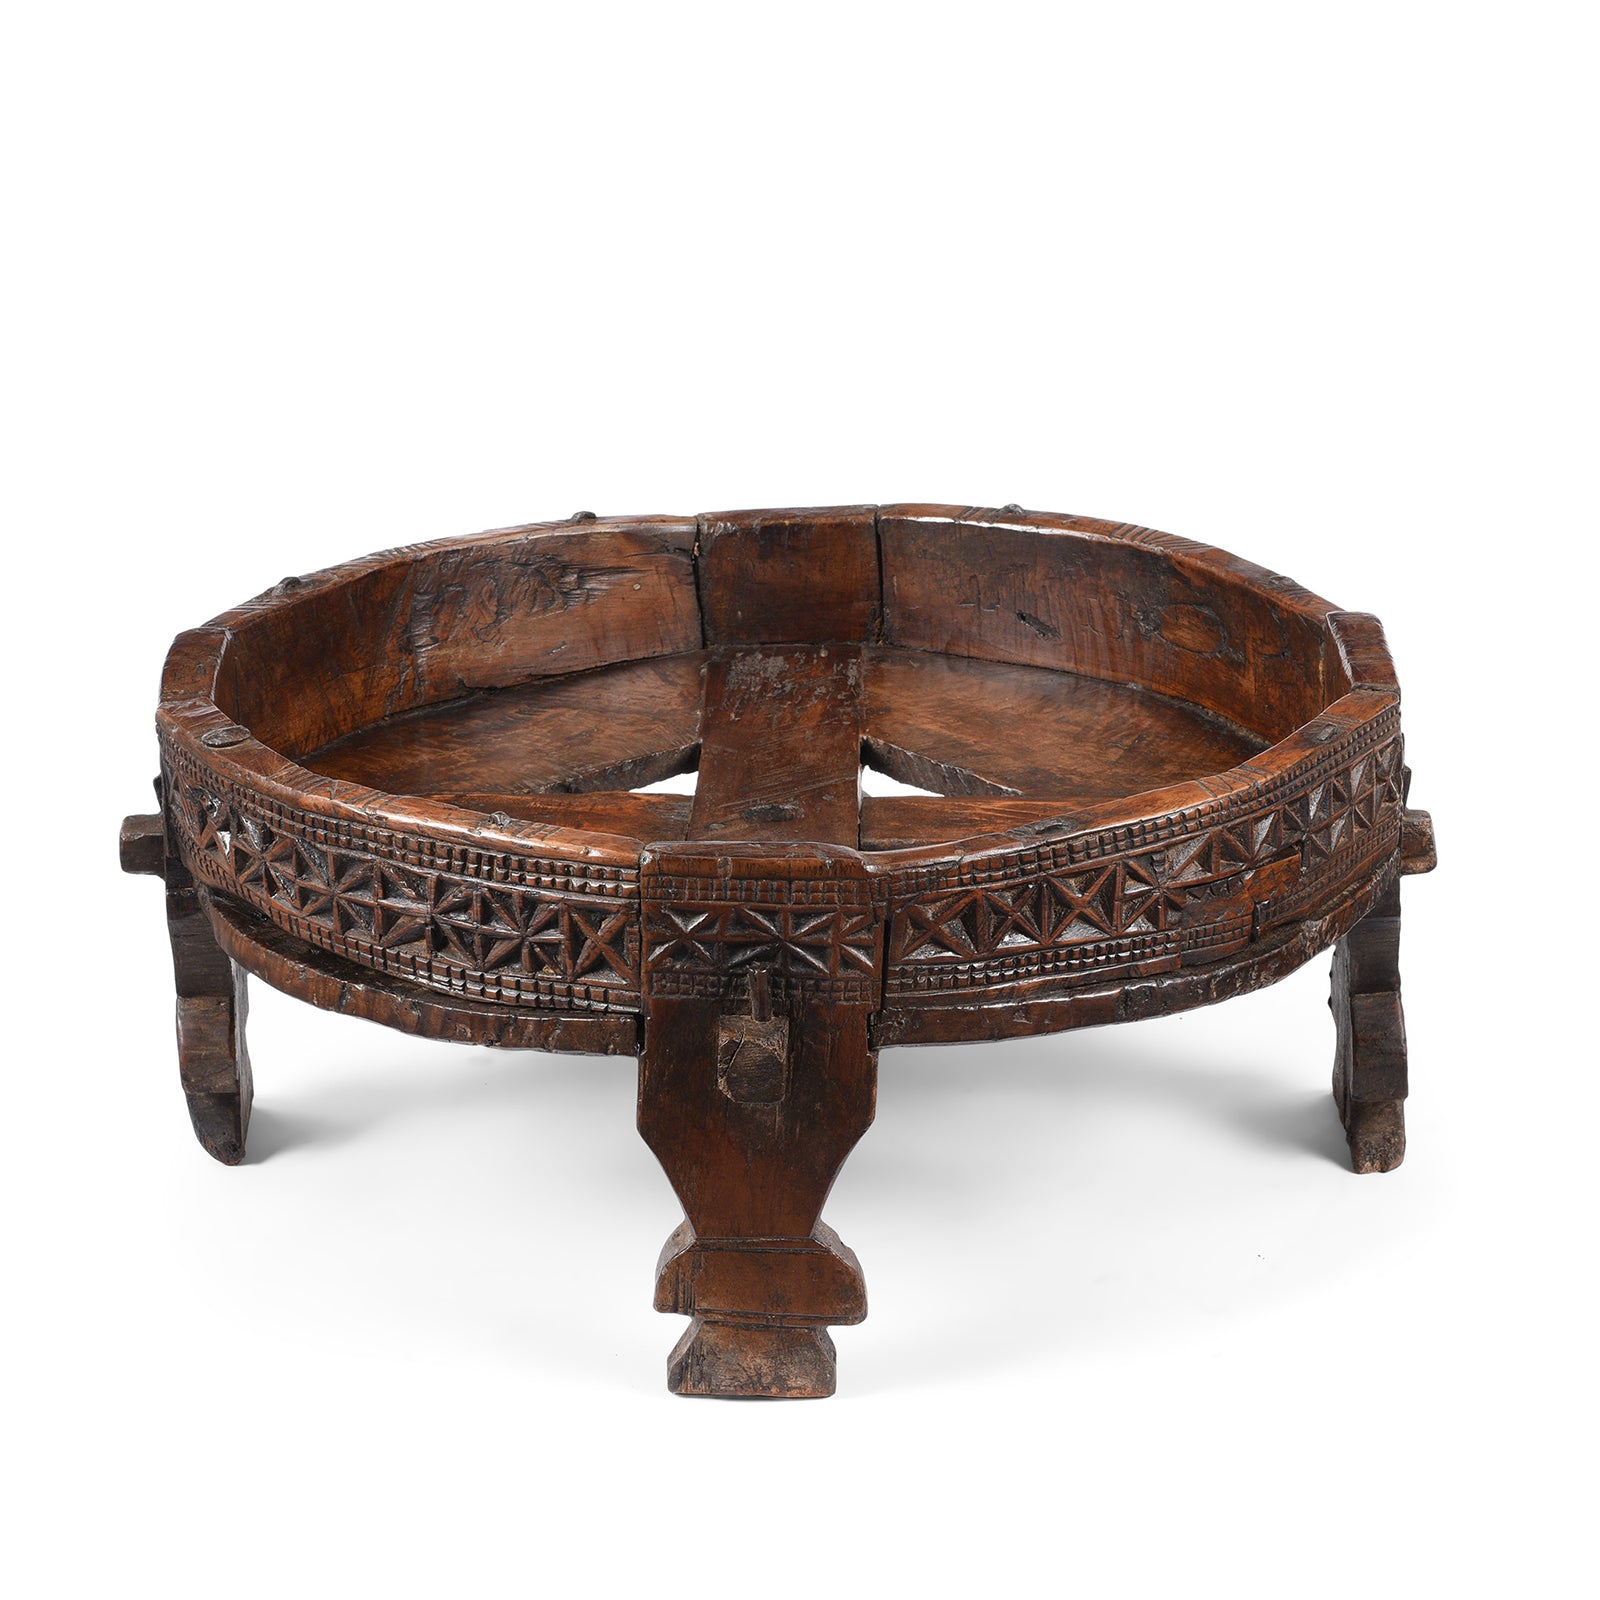 Antique Indian Chakki Coffee Table From Rajasthan | Indigo Antiques